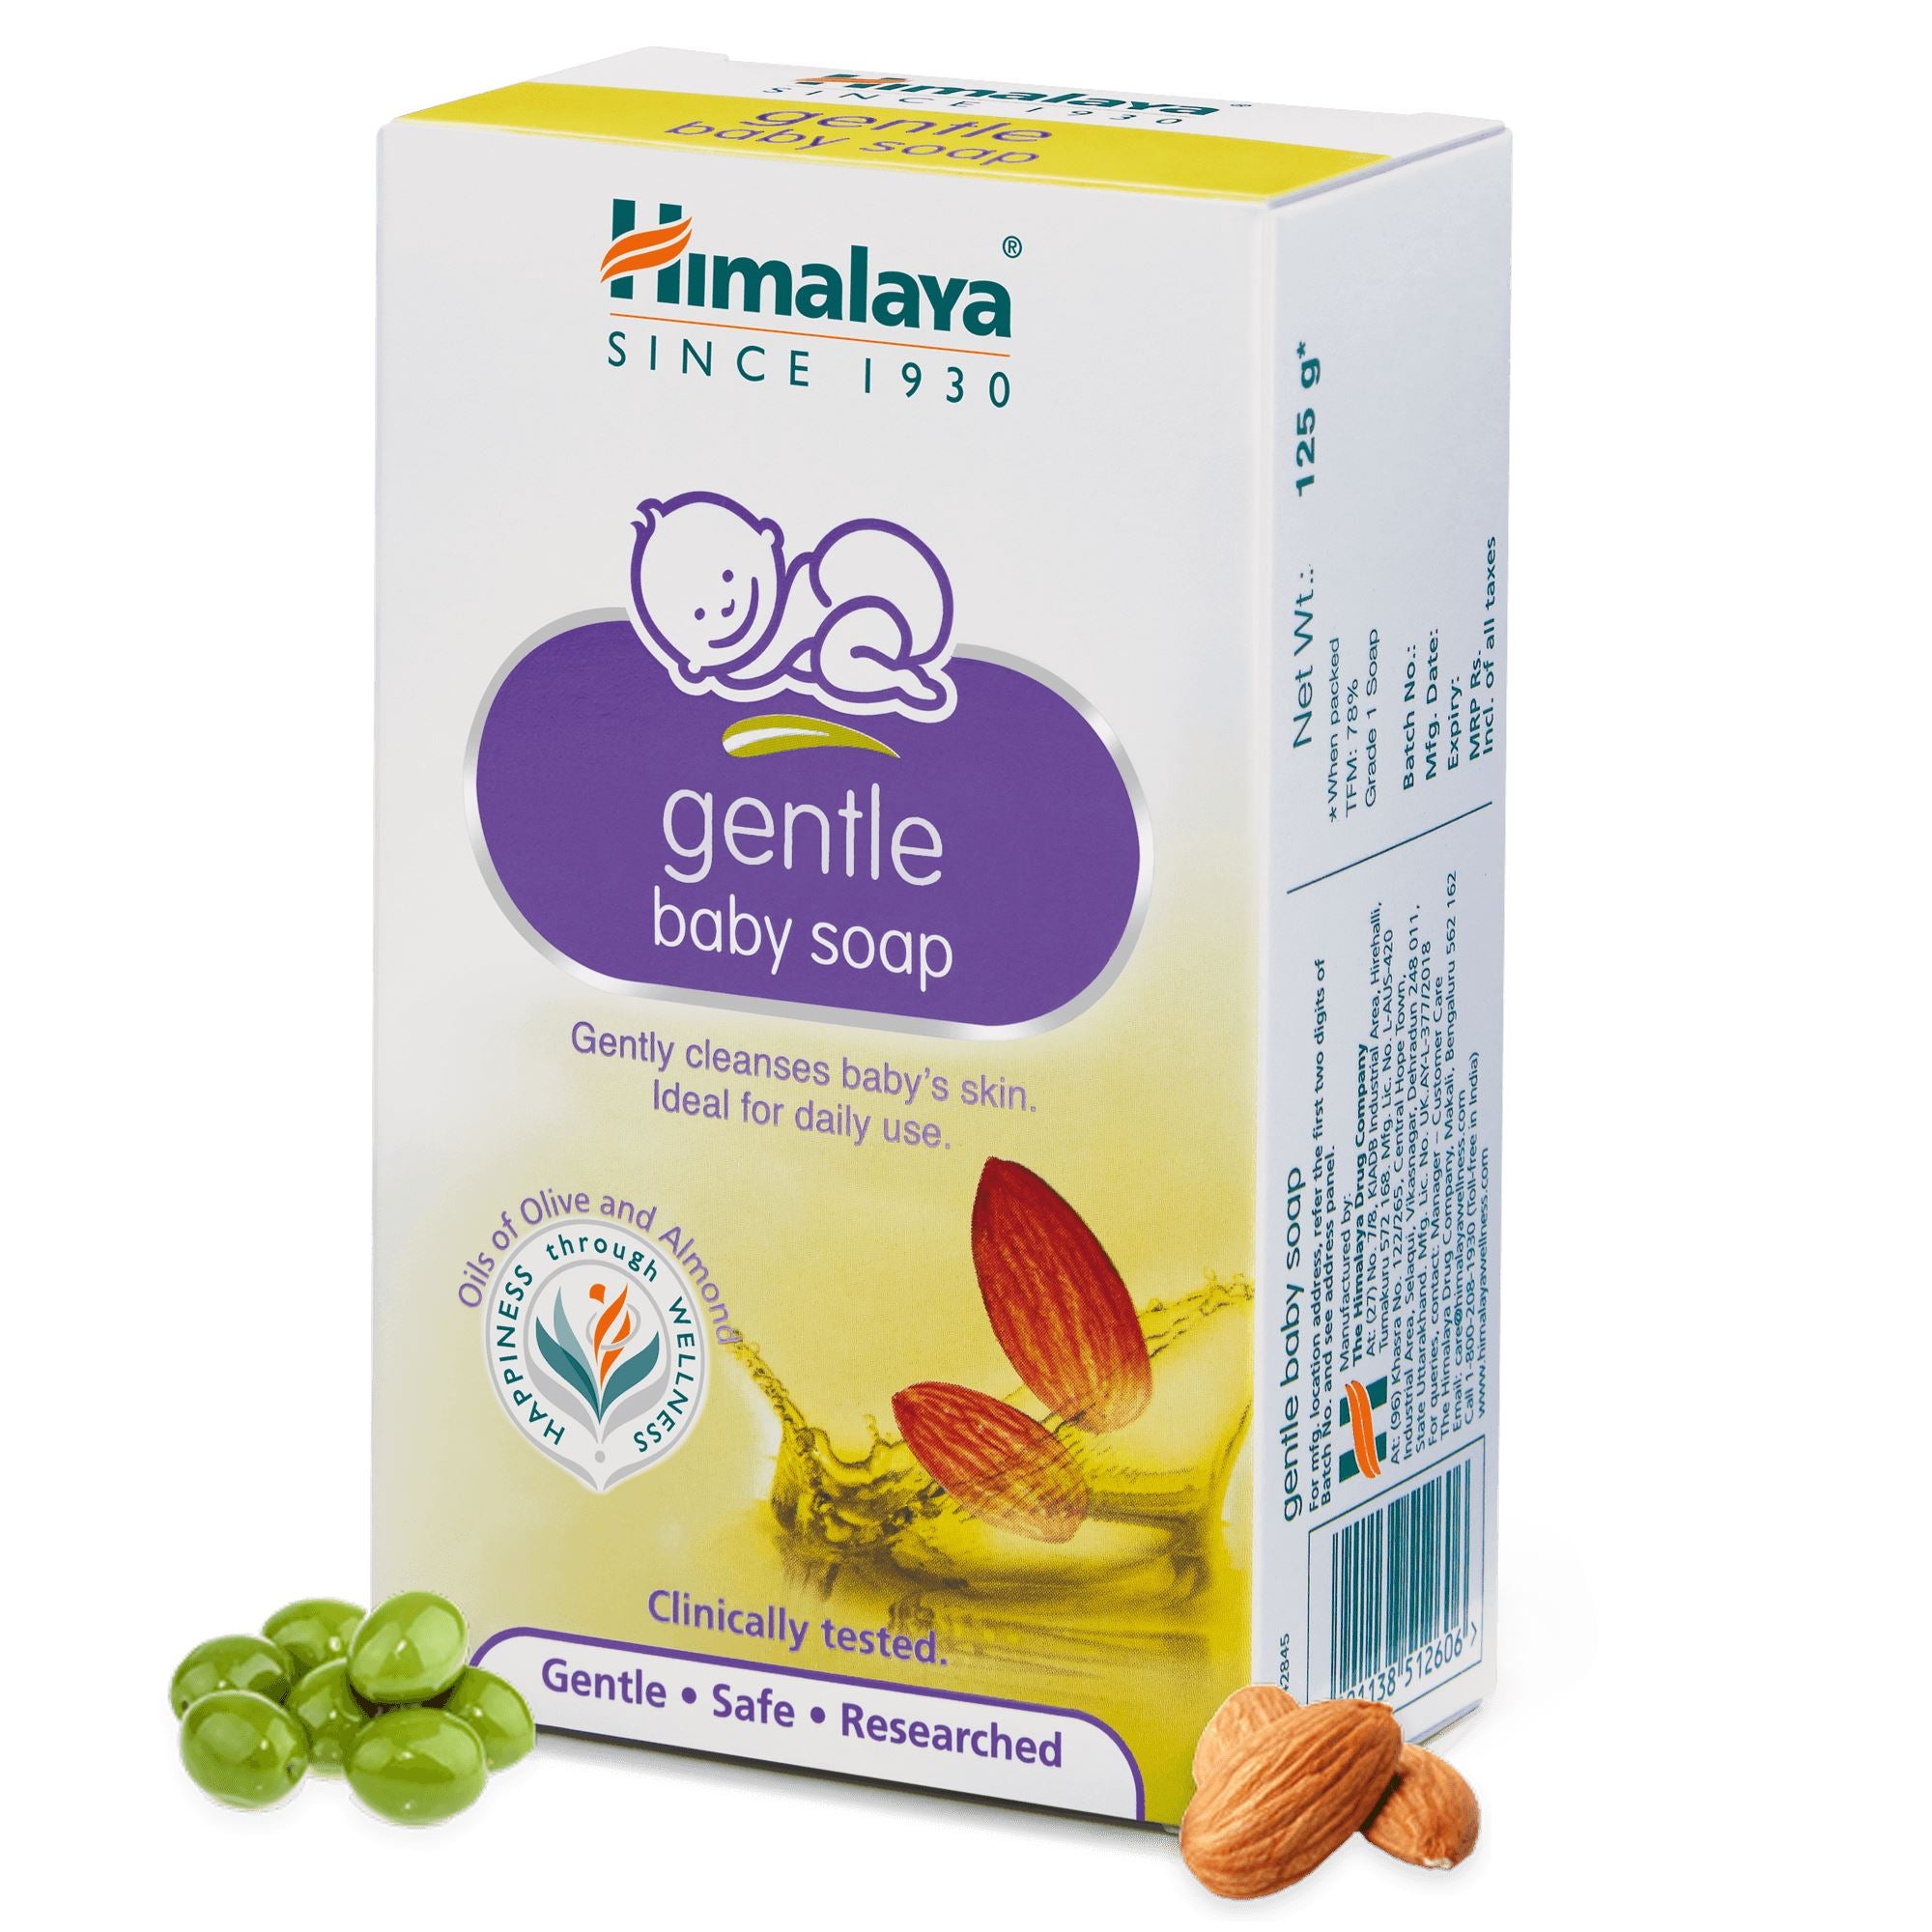 Himalaya Gentle Baby Soap 125g- Gently cleanses baby’s skin